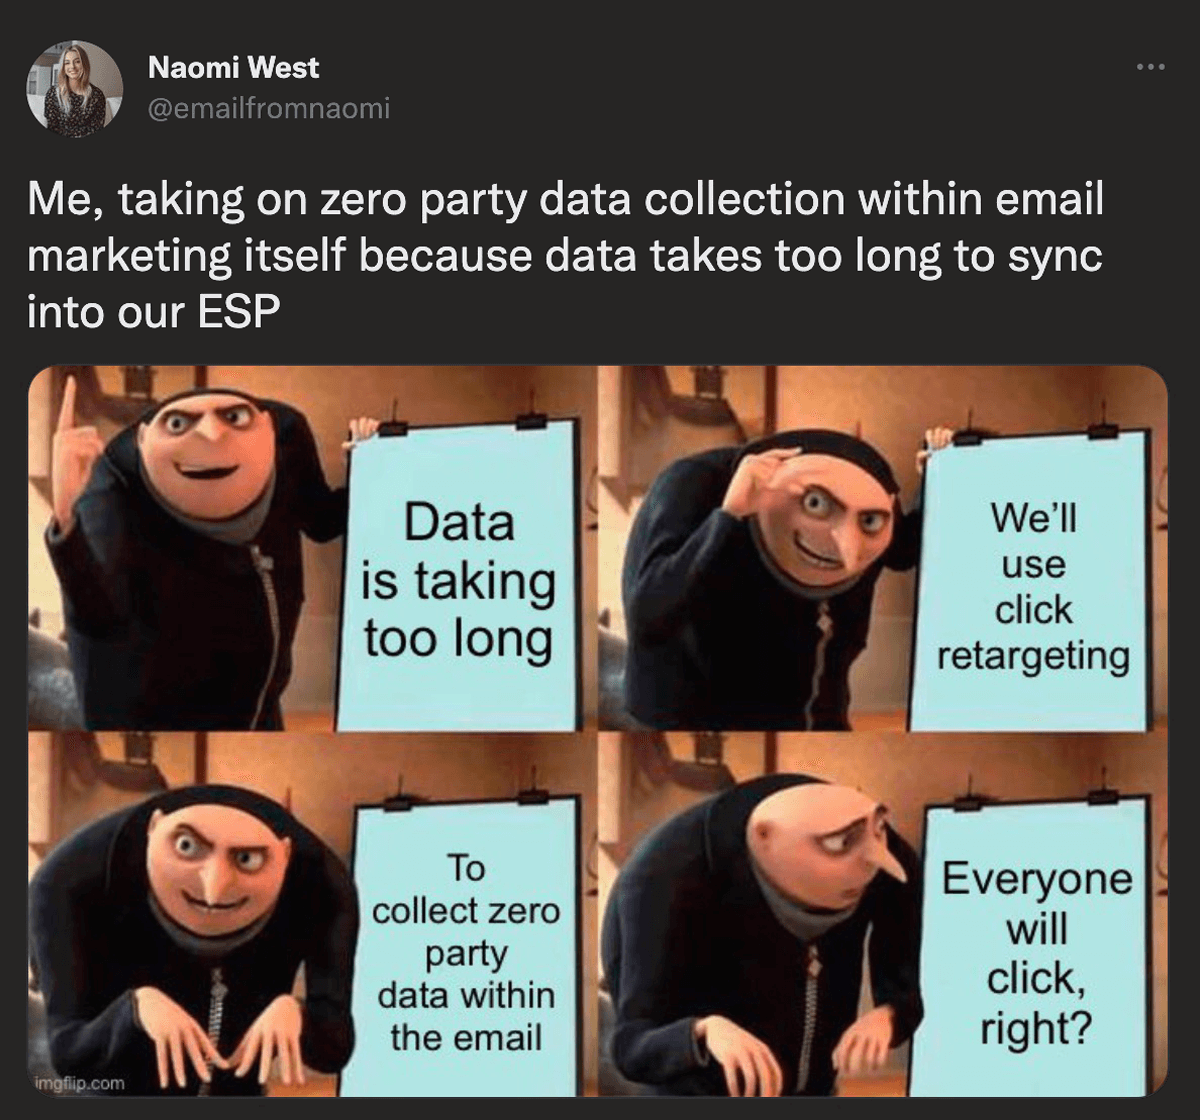 @emailfromnaomi on twitter: Me, taking on zero party data collection within email marketing itself because data takes too long to sync into our ESP. Gru with a presentation meme: 1. Data is taking too long 2. We'll use click retargeting 3. To collect zero party data within the email 4. Everyone will click, right?